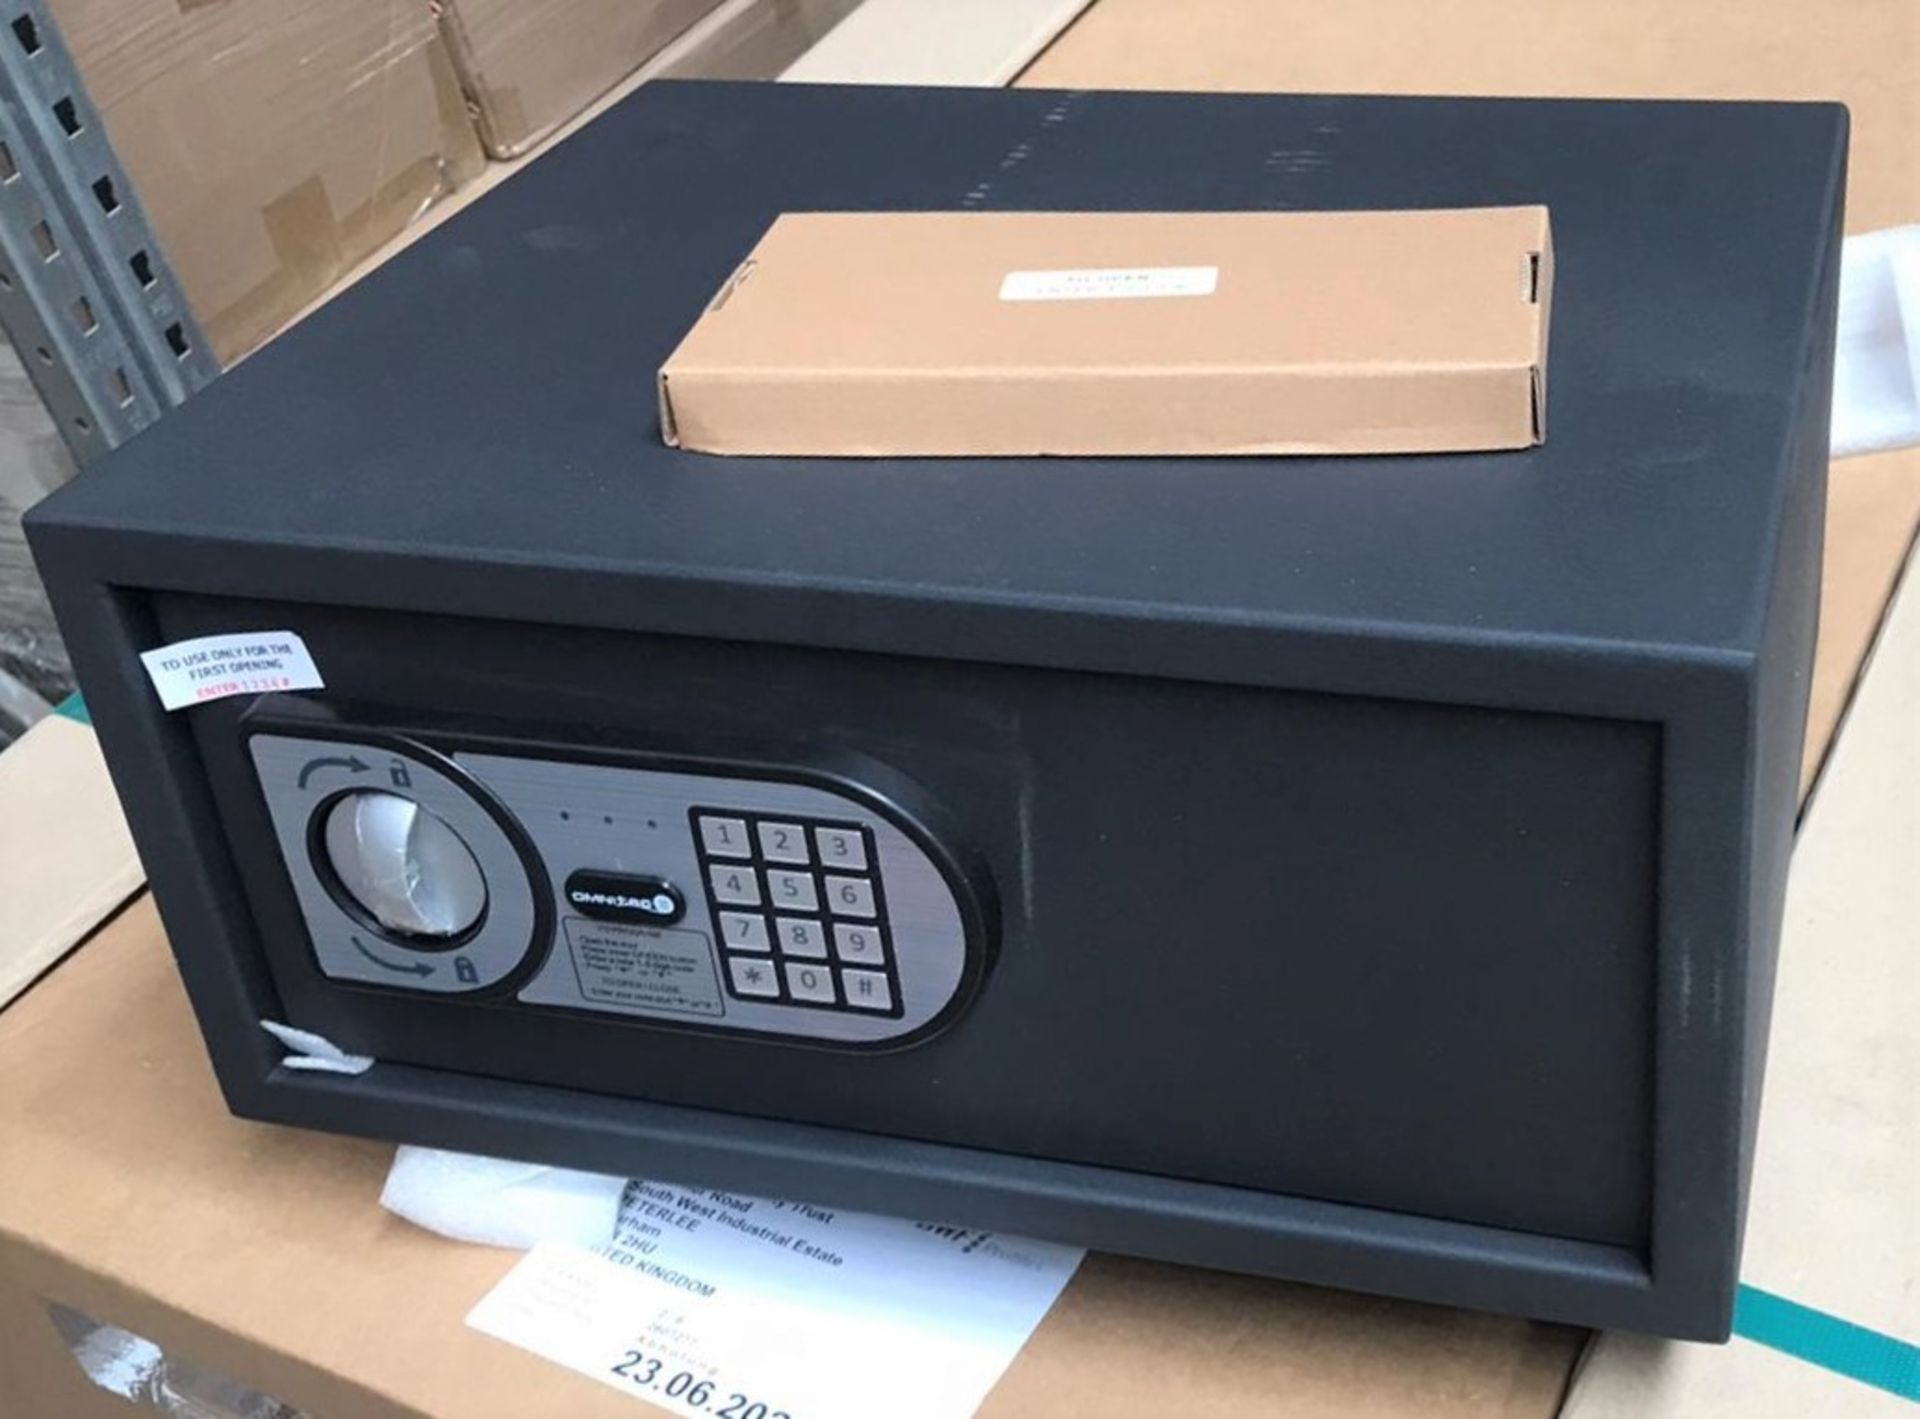 4 x Omnitec Safeguard Security Safes With Keypad Opening - Model Laptop 15 - Size H20 x W43 x D35 - Image 3 of 7